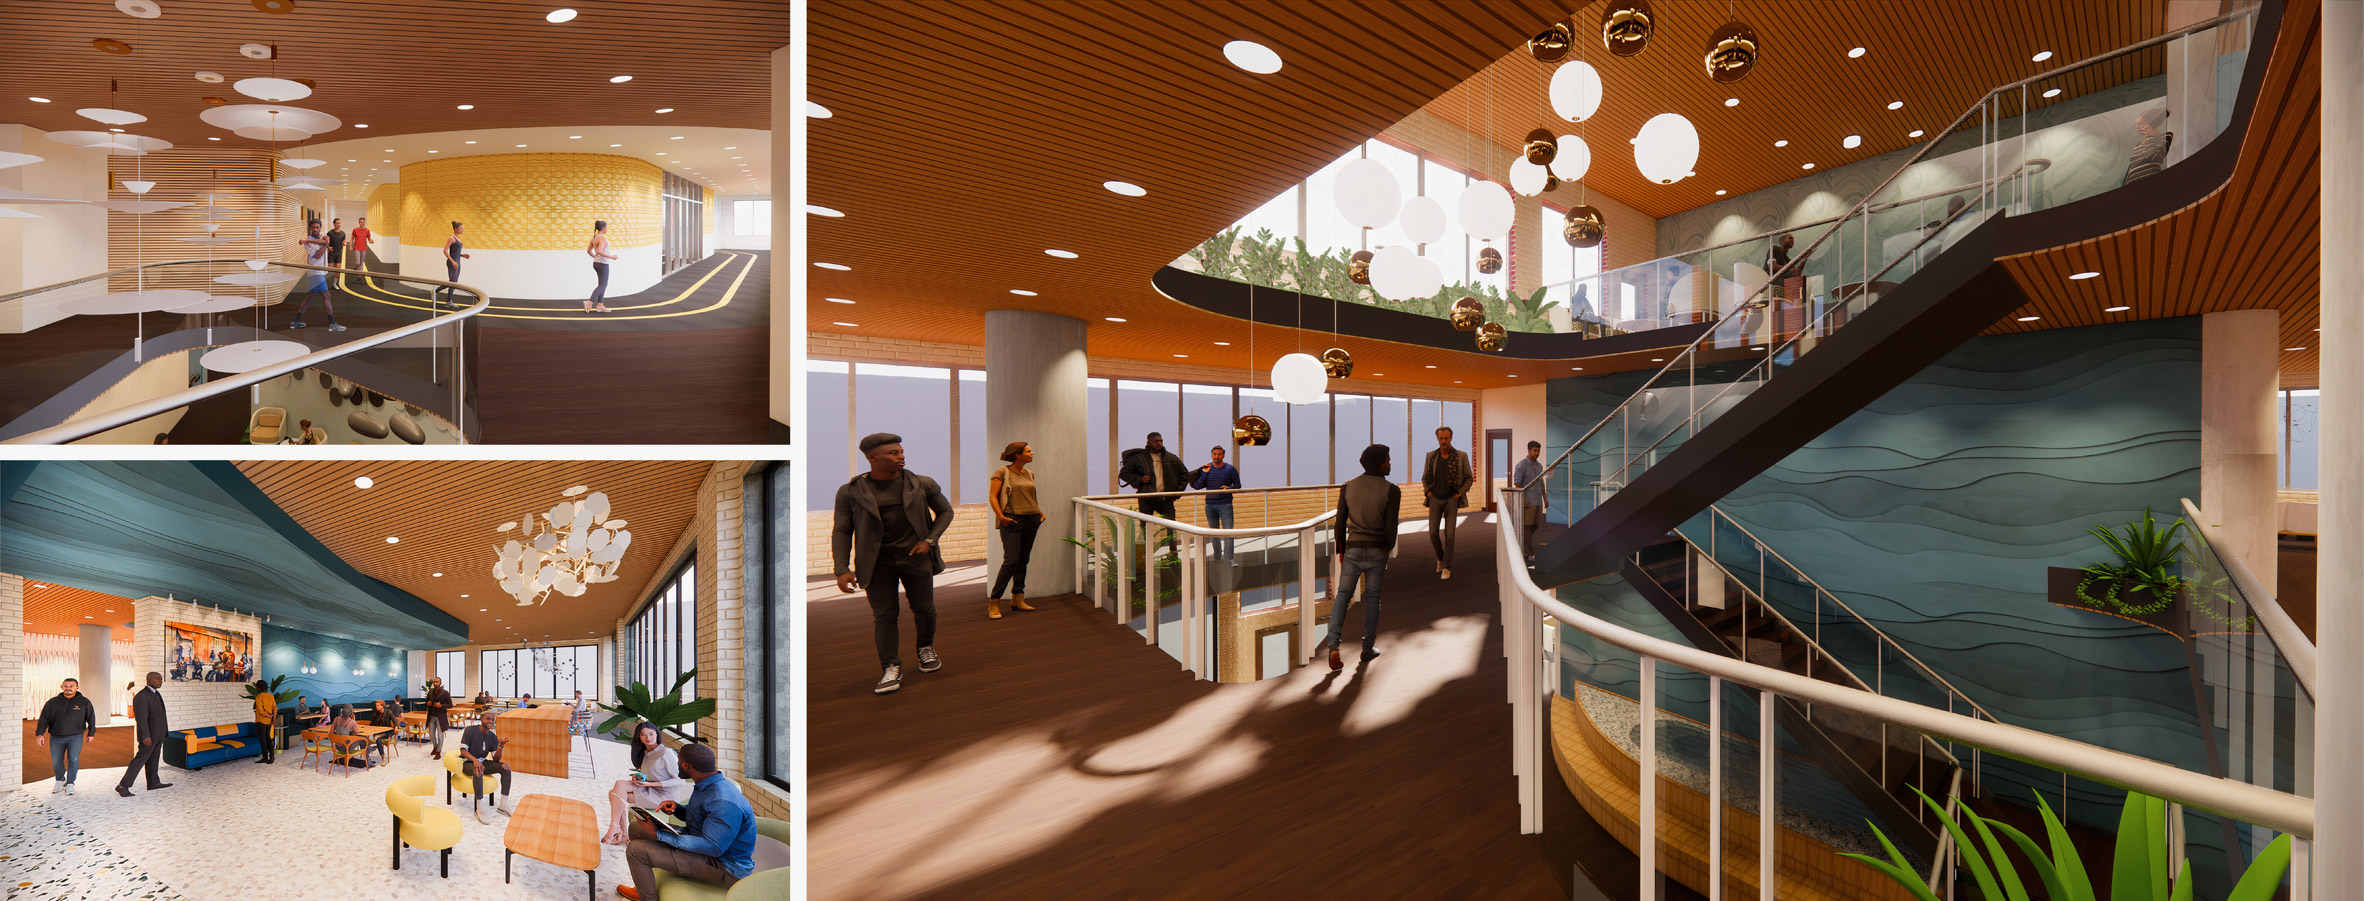 Collage of renders showing interior of community centre